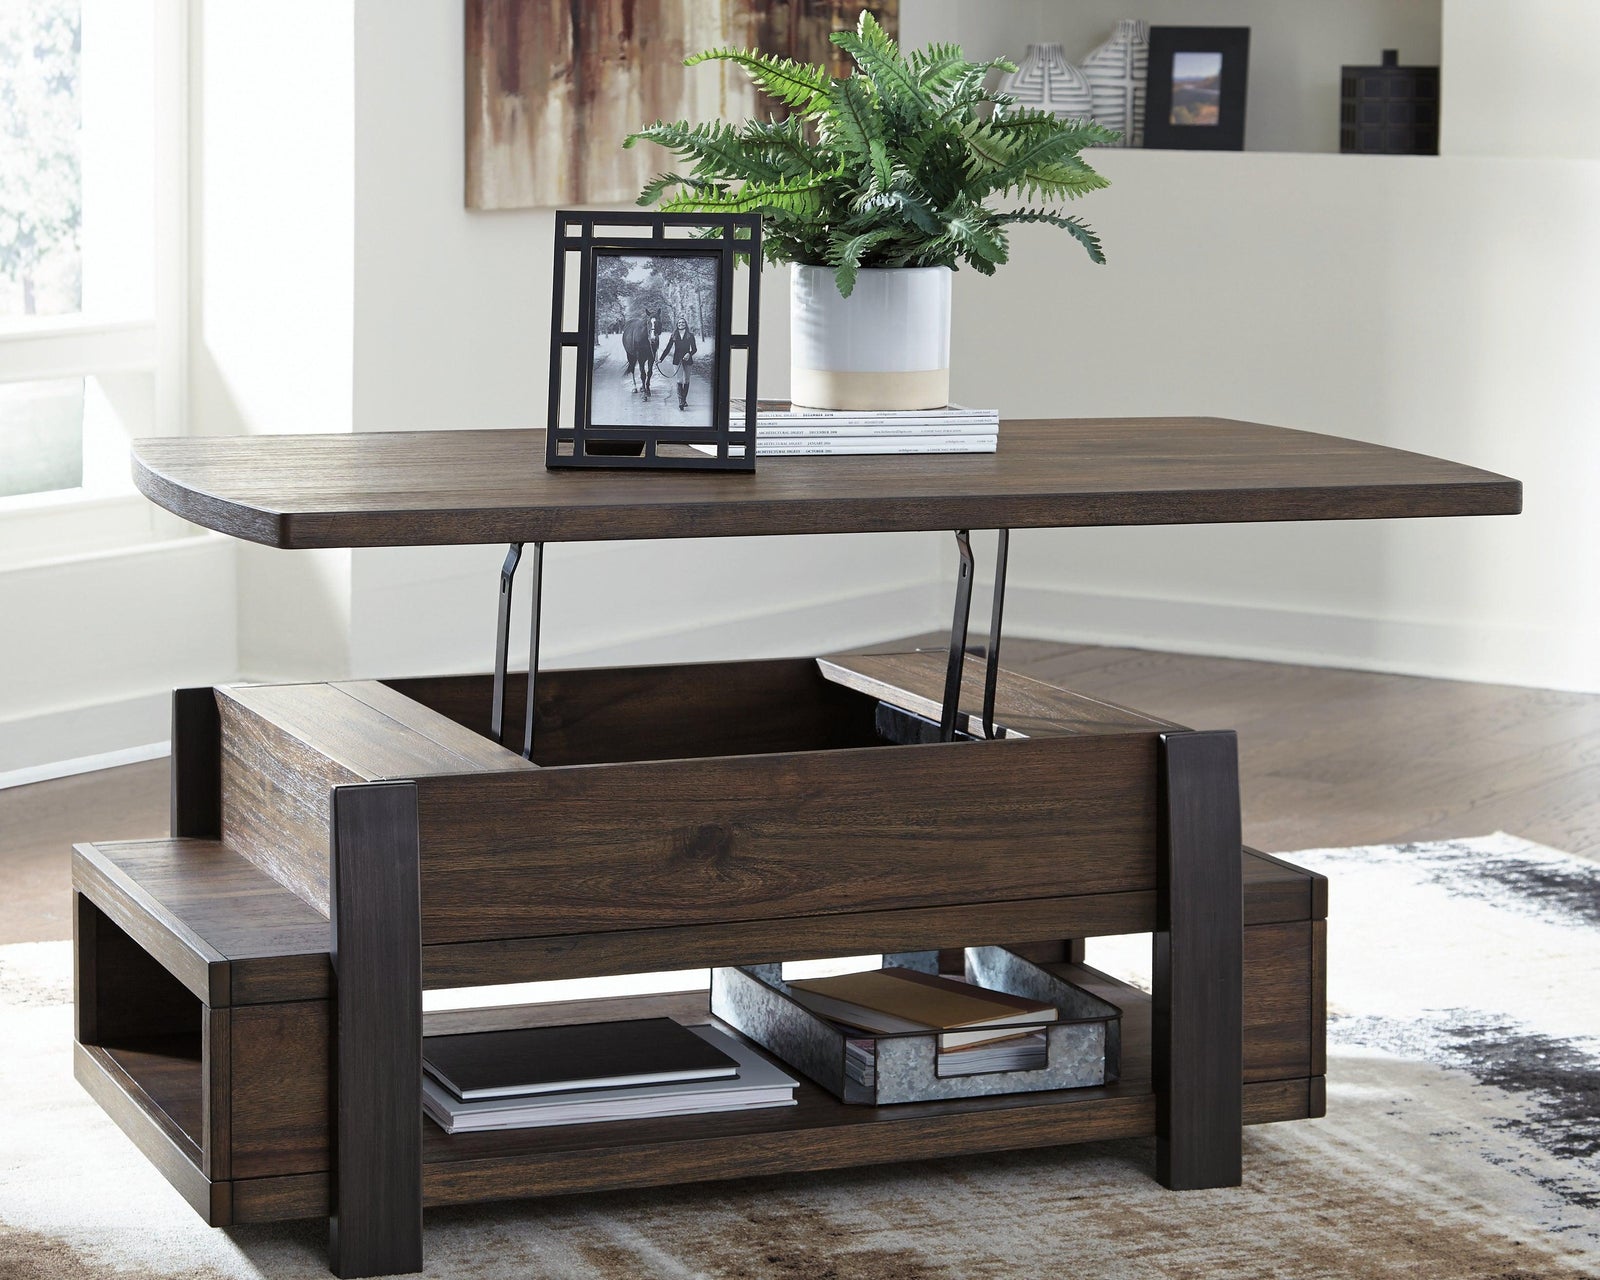 Vailbry Brown Coffee Table With Lift Top